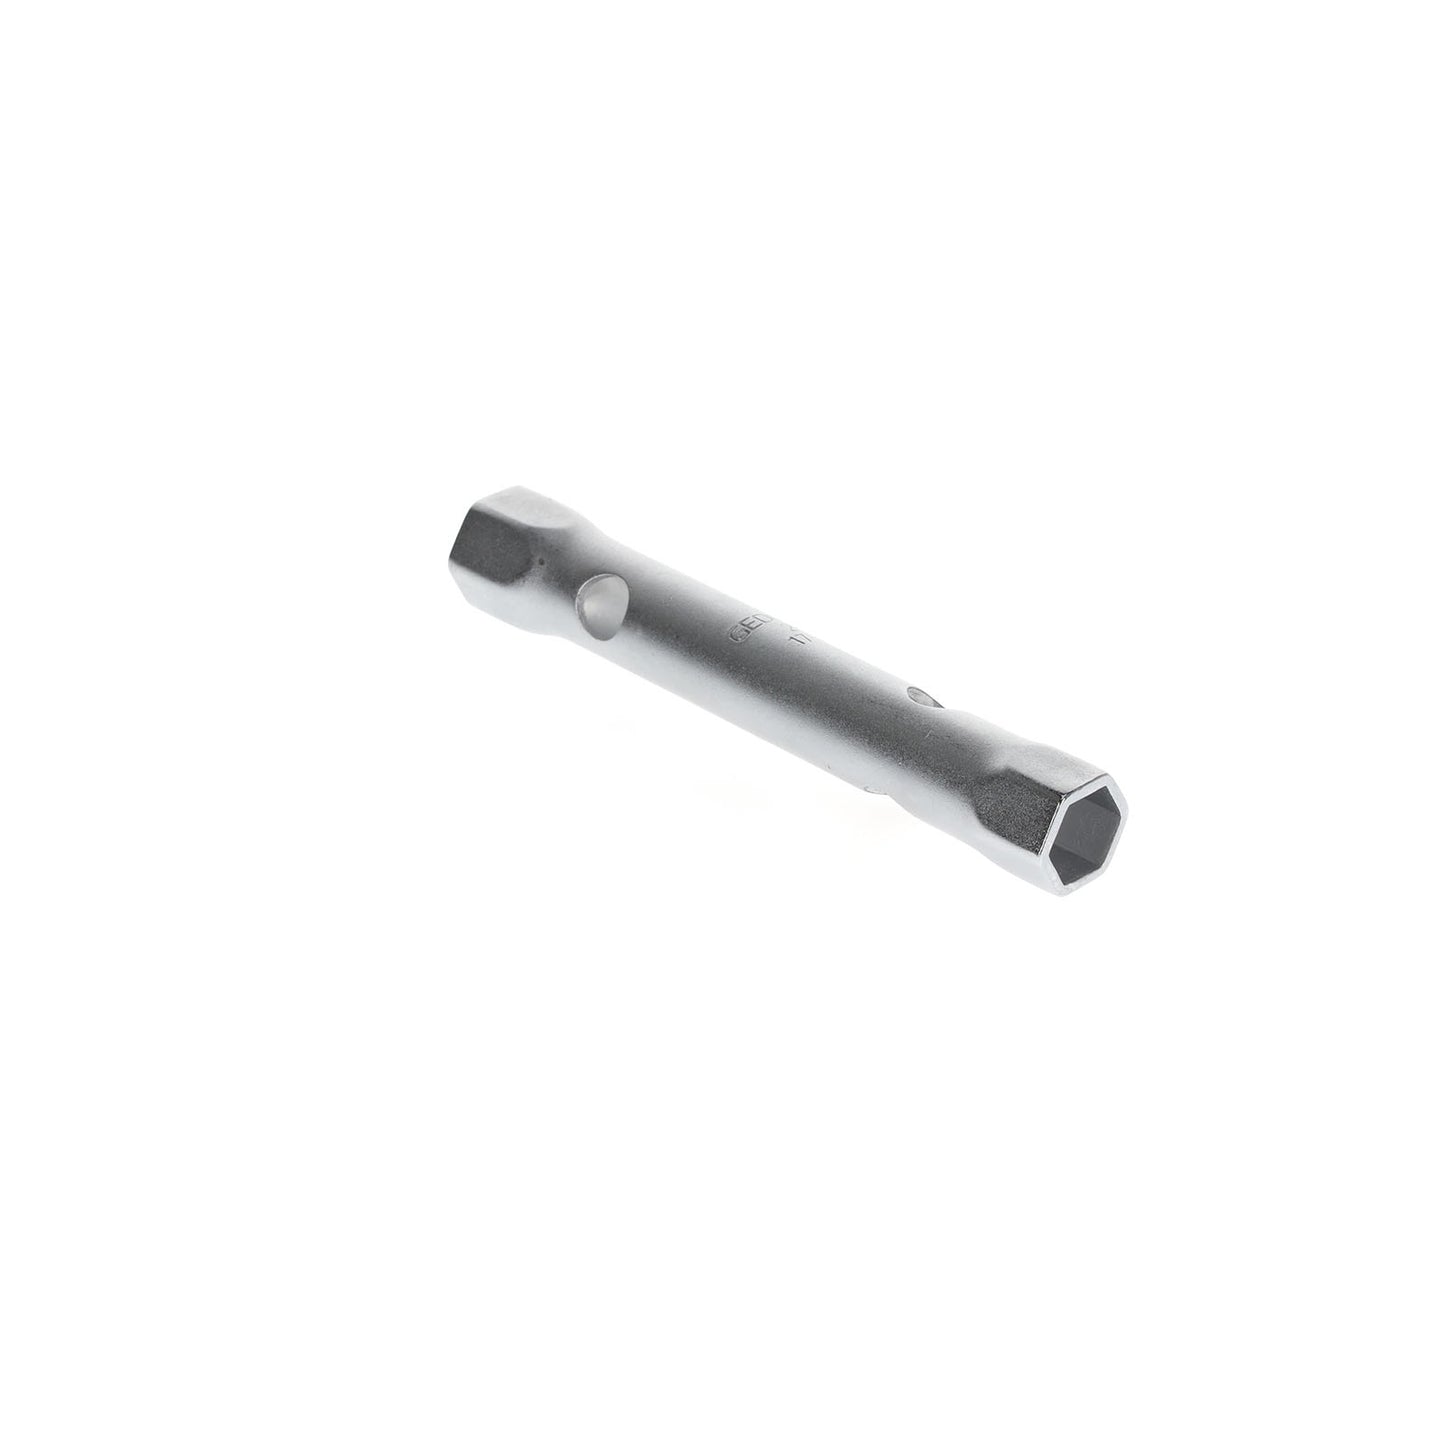 GEDORE 26 R 17X19 - Hollow Socket Wrench, 17x19 (6211880)